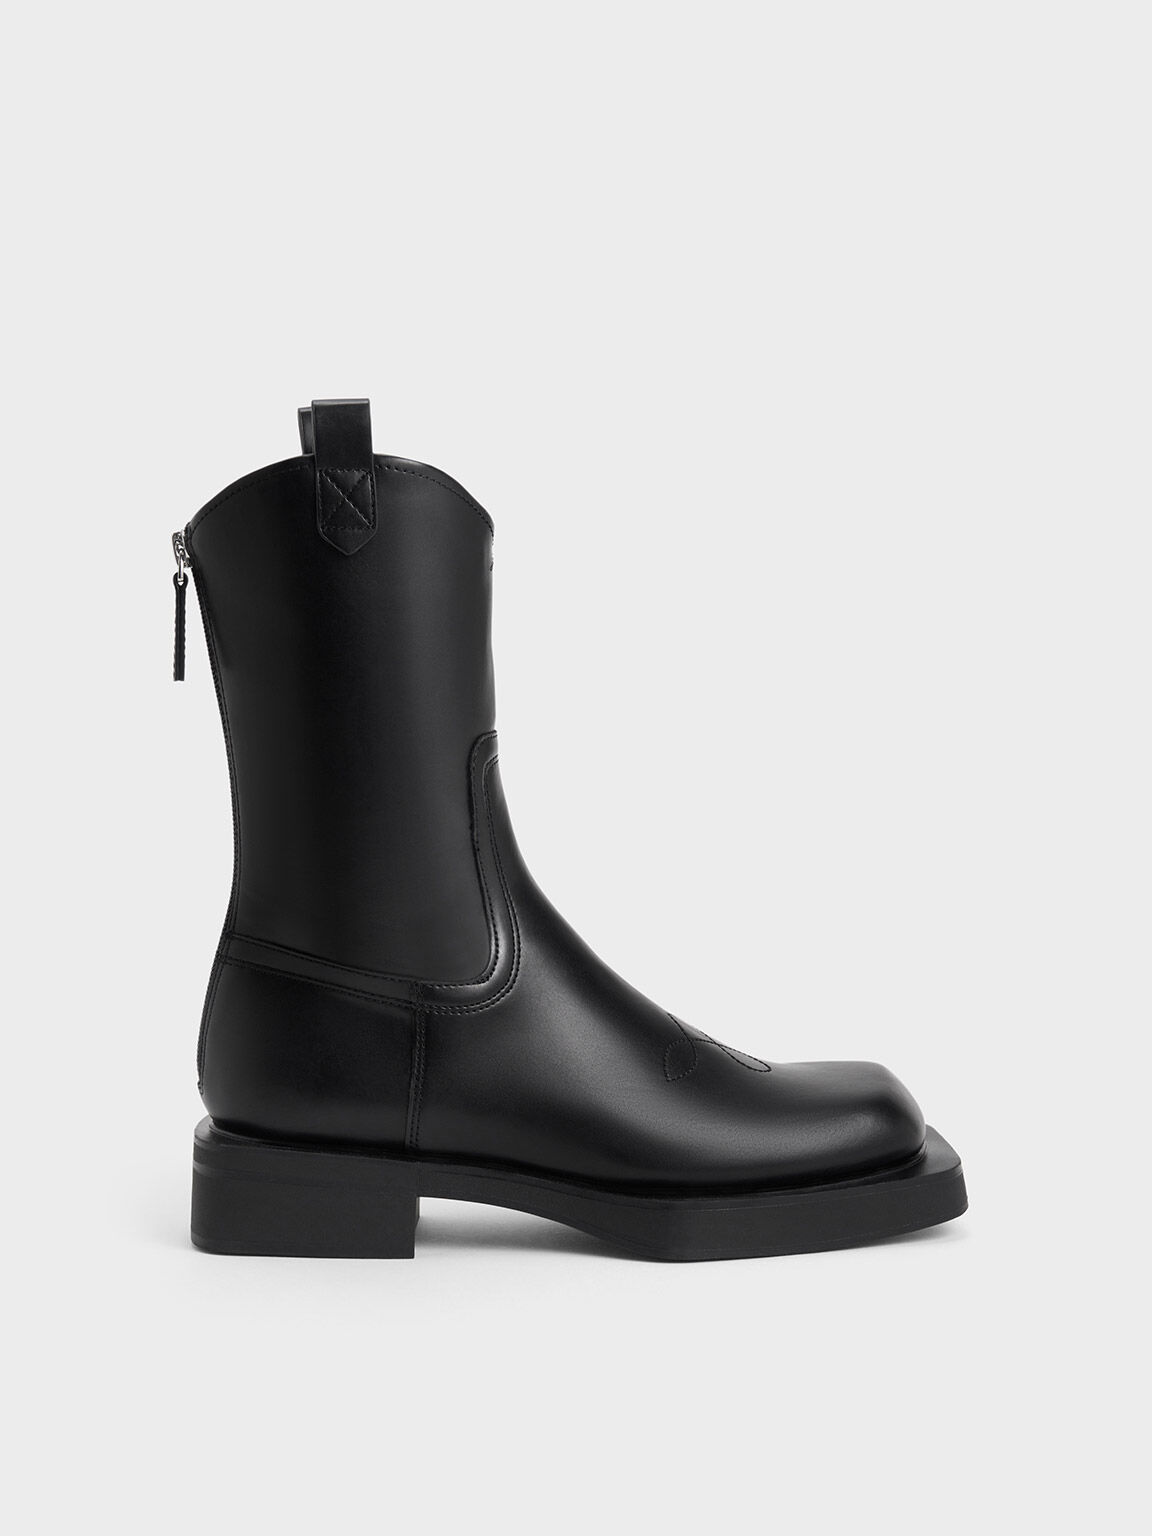 Women's Boots | Shop Exclusive Styles | CHARLES & KEITH SG